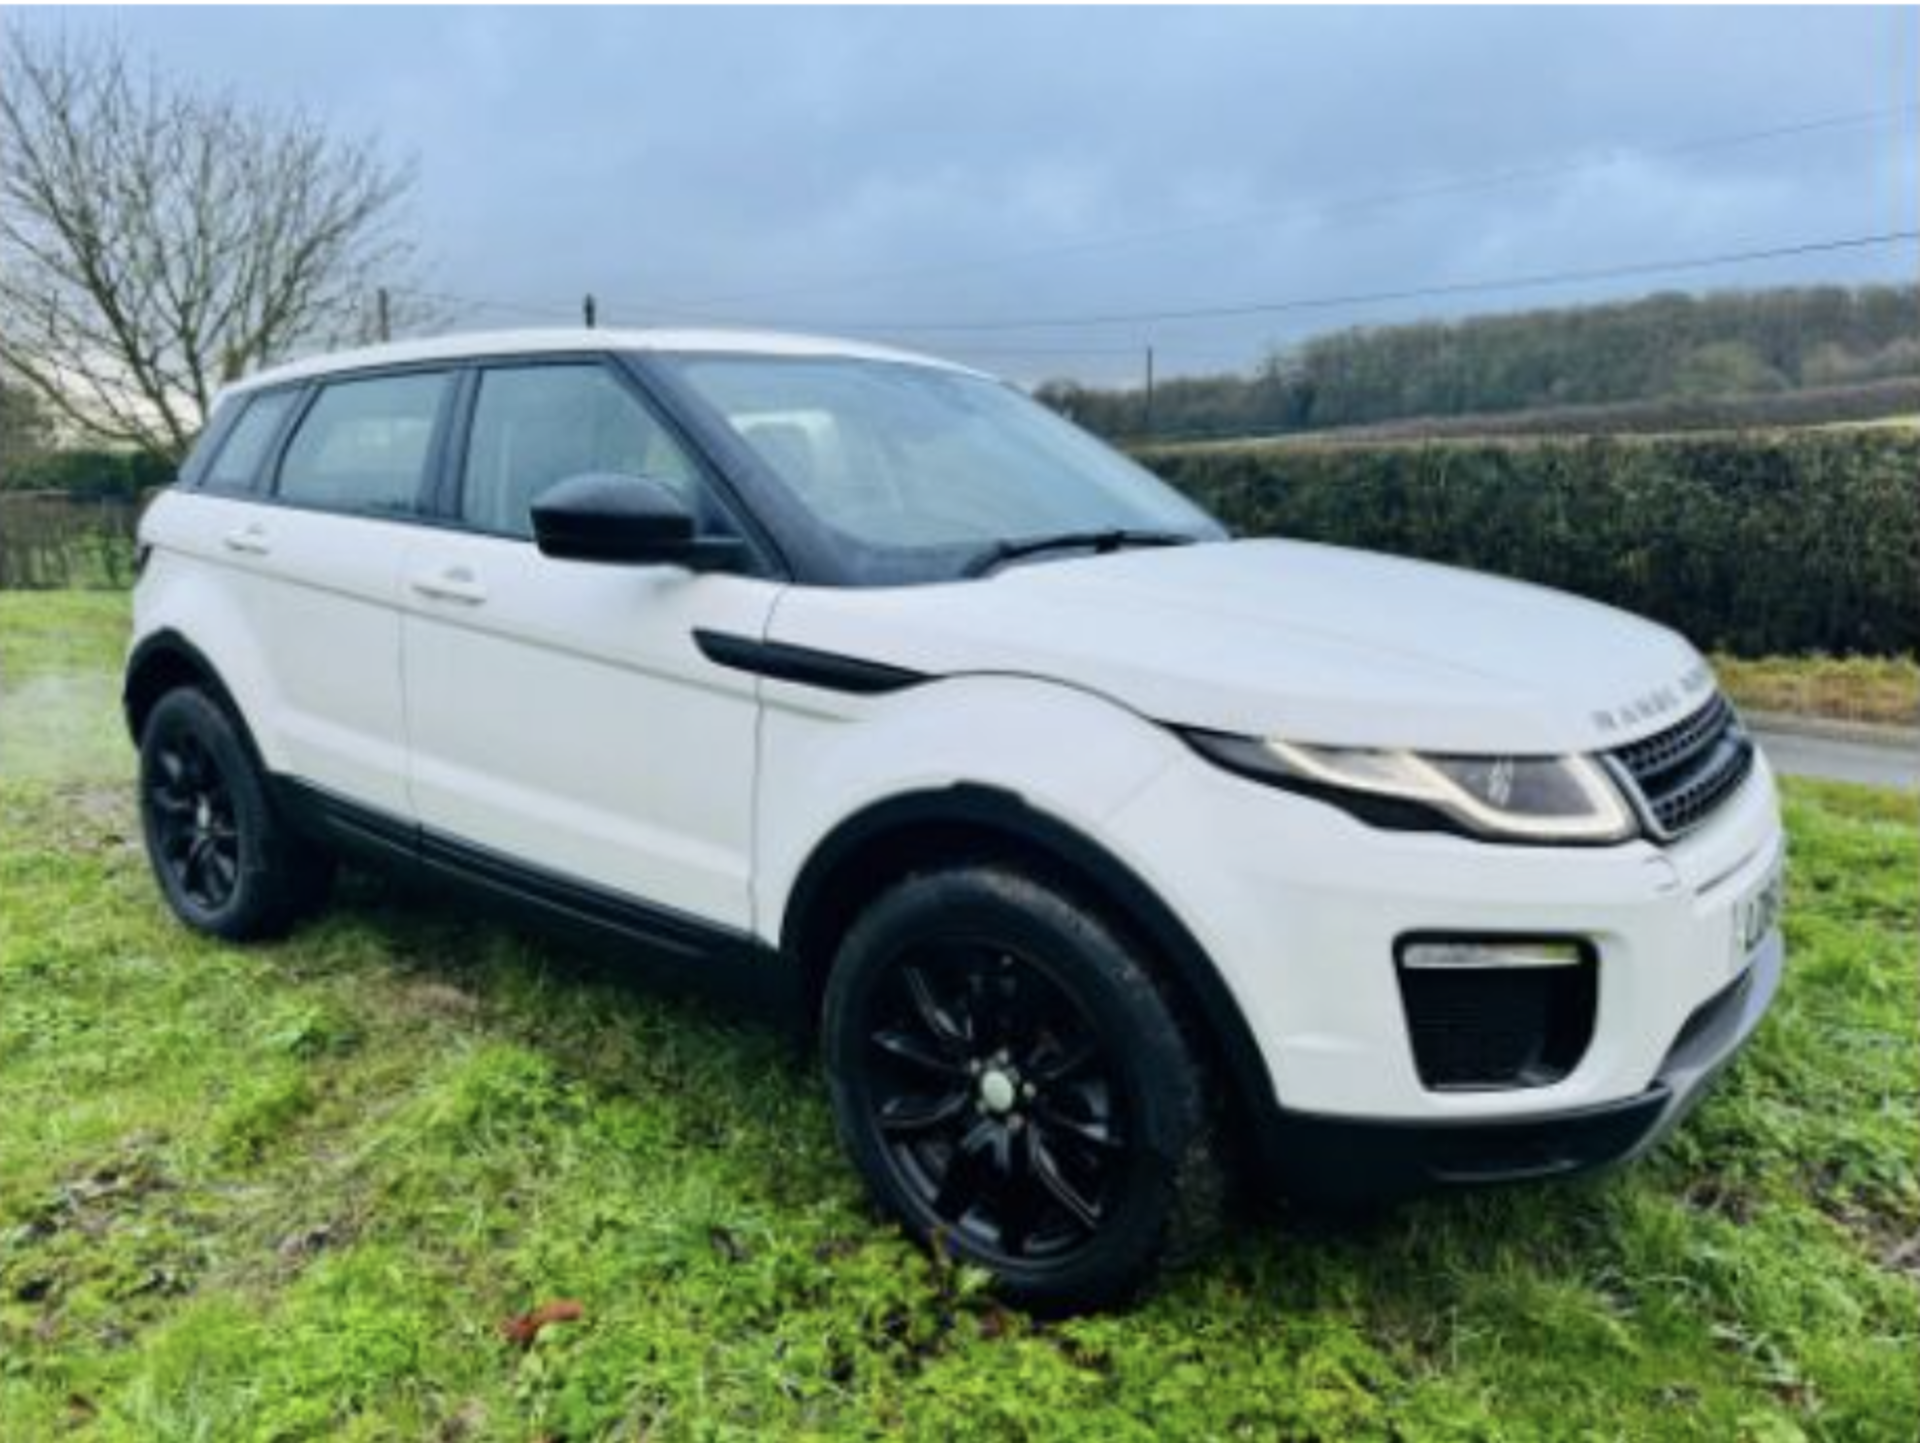 *RESERVE MET* RANGE ROVER EVOQUE 2.0 TD4 SE Tech 5dr Automatic - 2016 - Pan Roof - Air con - Full L